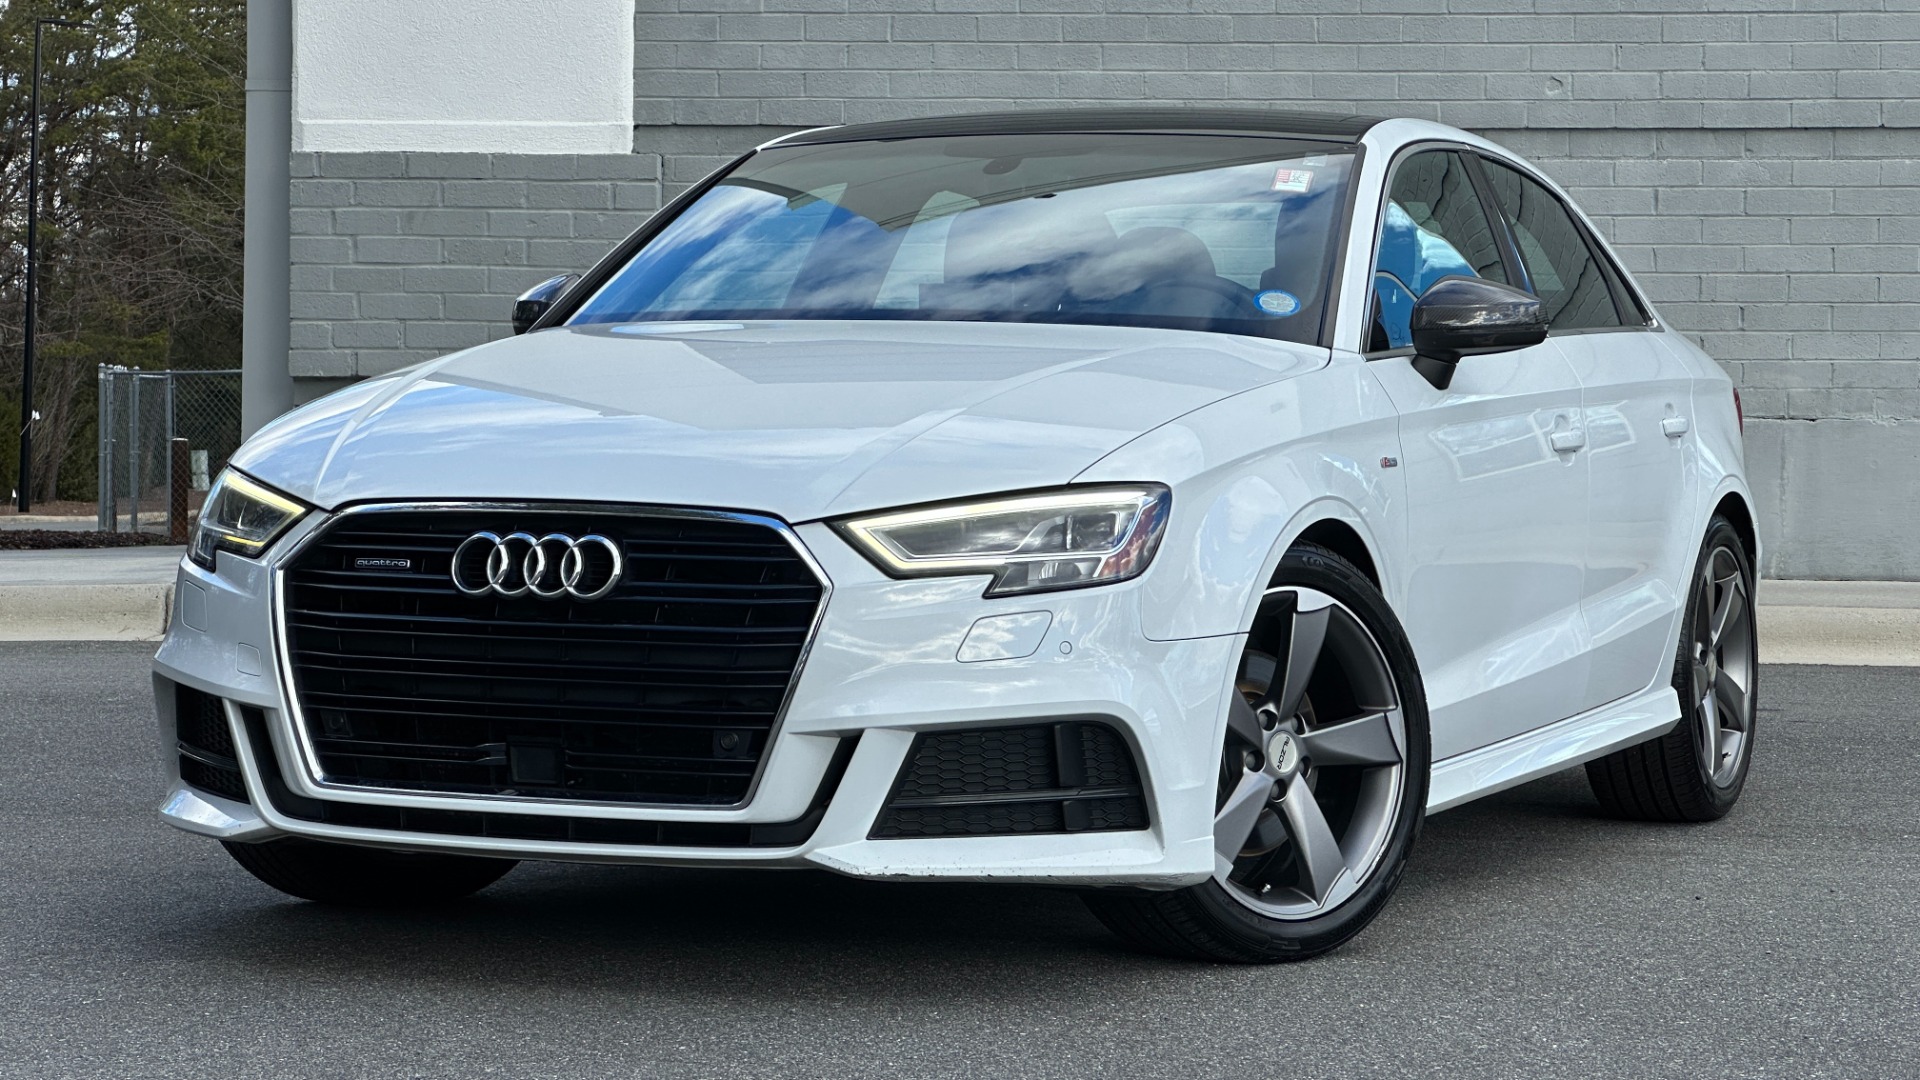 Used 2017 Audi A3 Sedan PREMIUM PLUS / SPORT PACKAGE / LIGHT PACKAGE / SPORT SUSPENSION / B&O SOUND for sale $21,995 at Formula Imports in Charlotte NC 28227 1